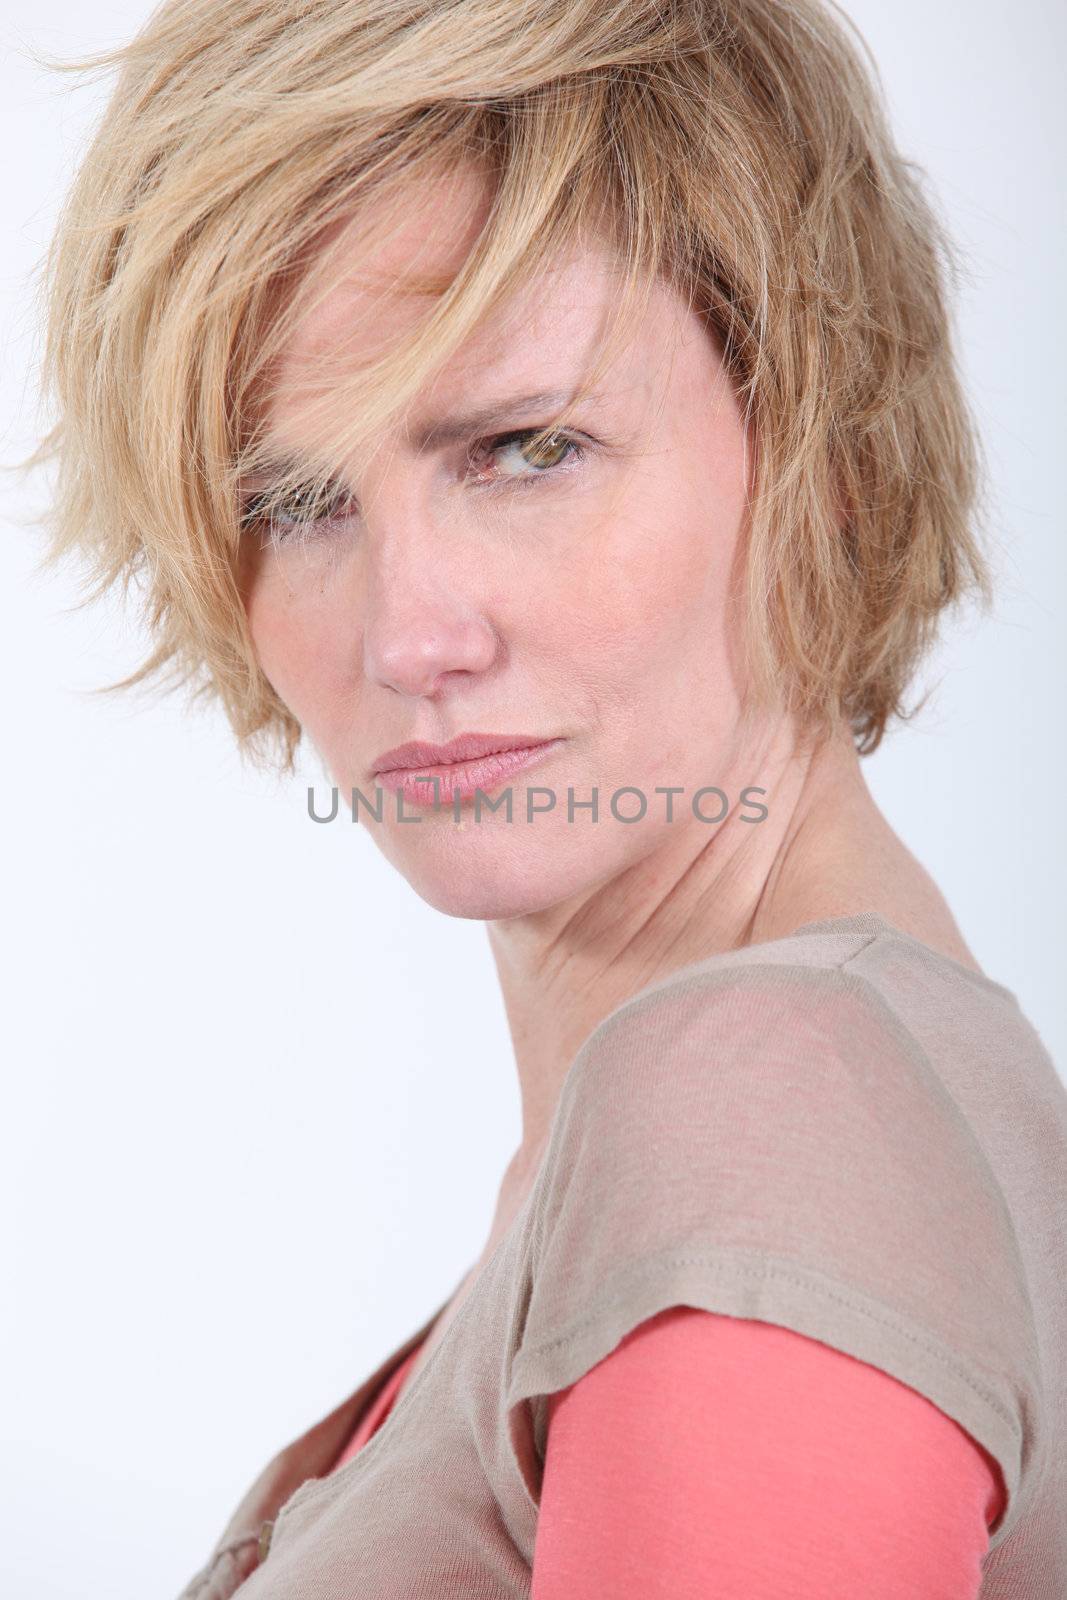 50 years old woman with tousled hair looks anger or in trouble by phovoir